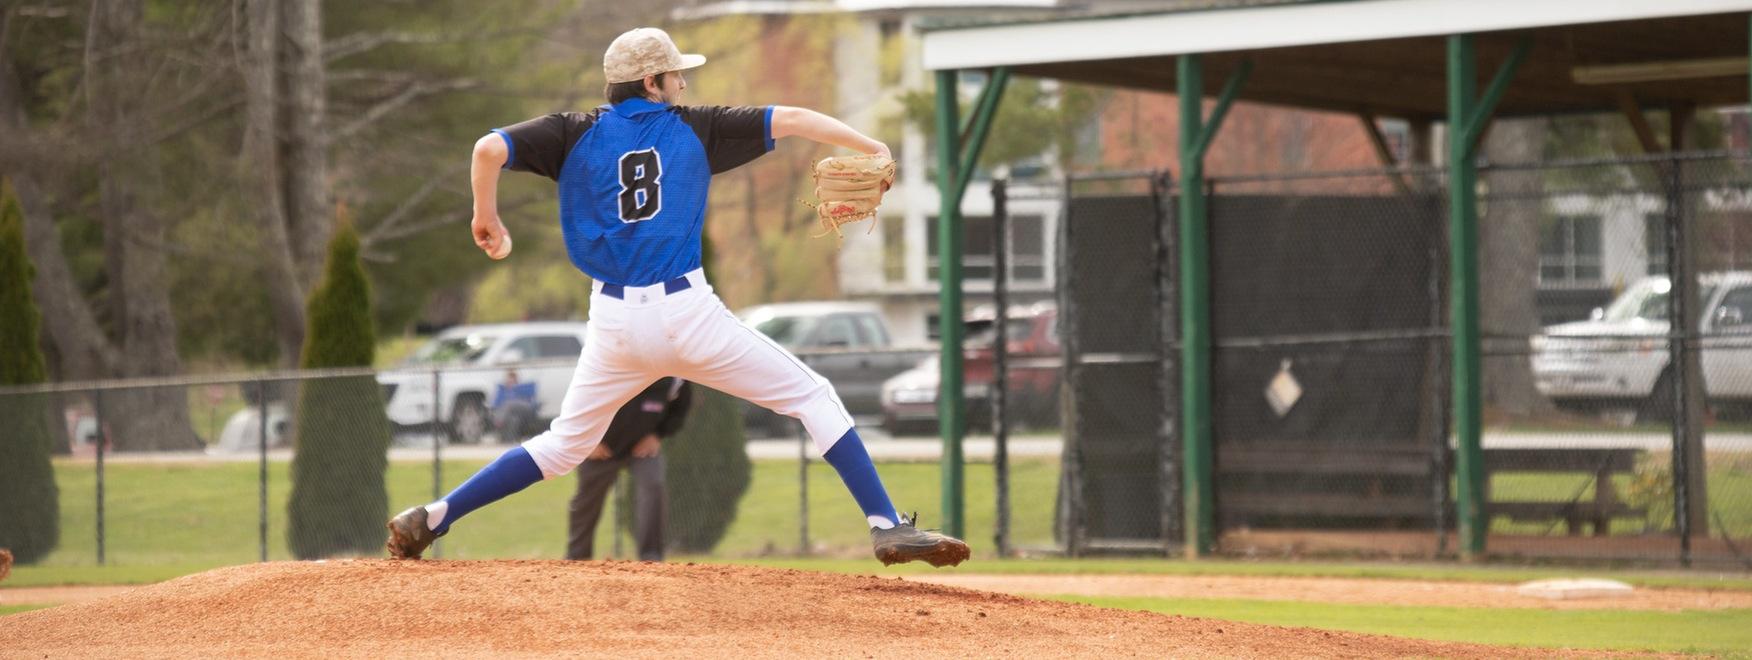 Sophomore lefty Matthew Scavotto hurled four innings of one-run ball, striking out six Lions to tie his career-high (Photo courtesy of Thom Kennedy '21).